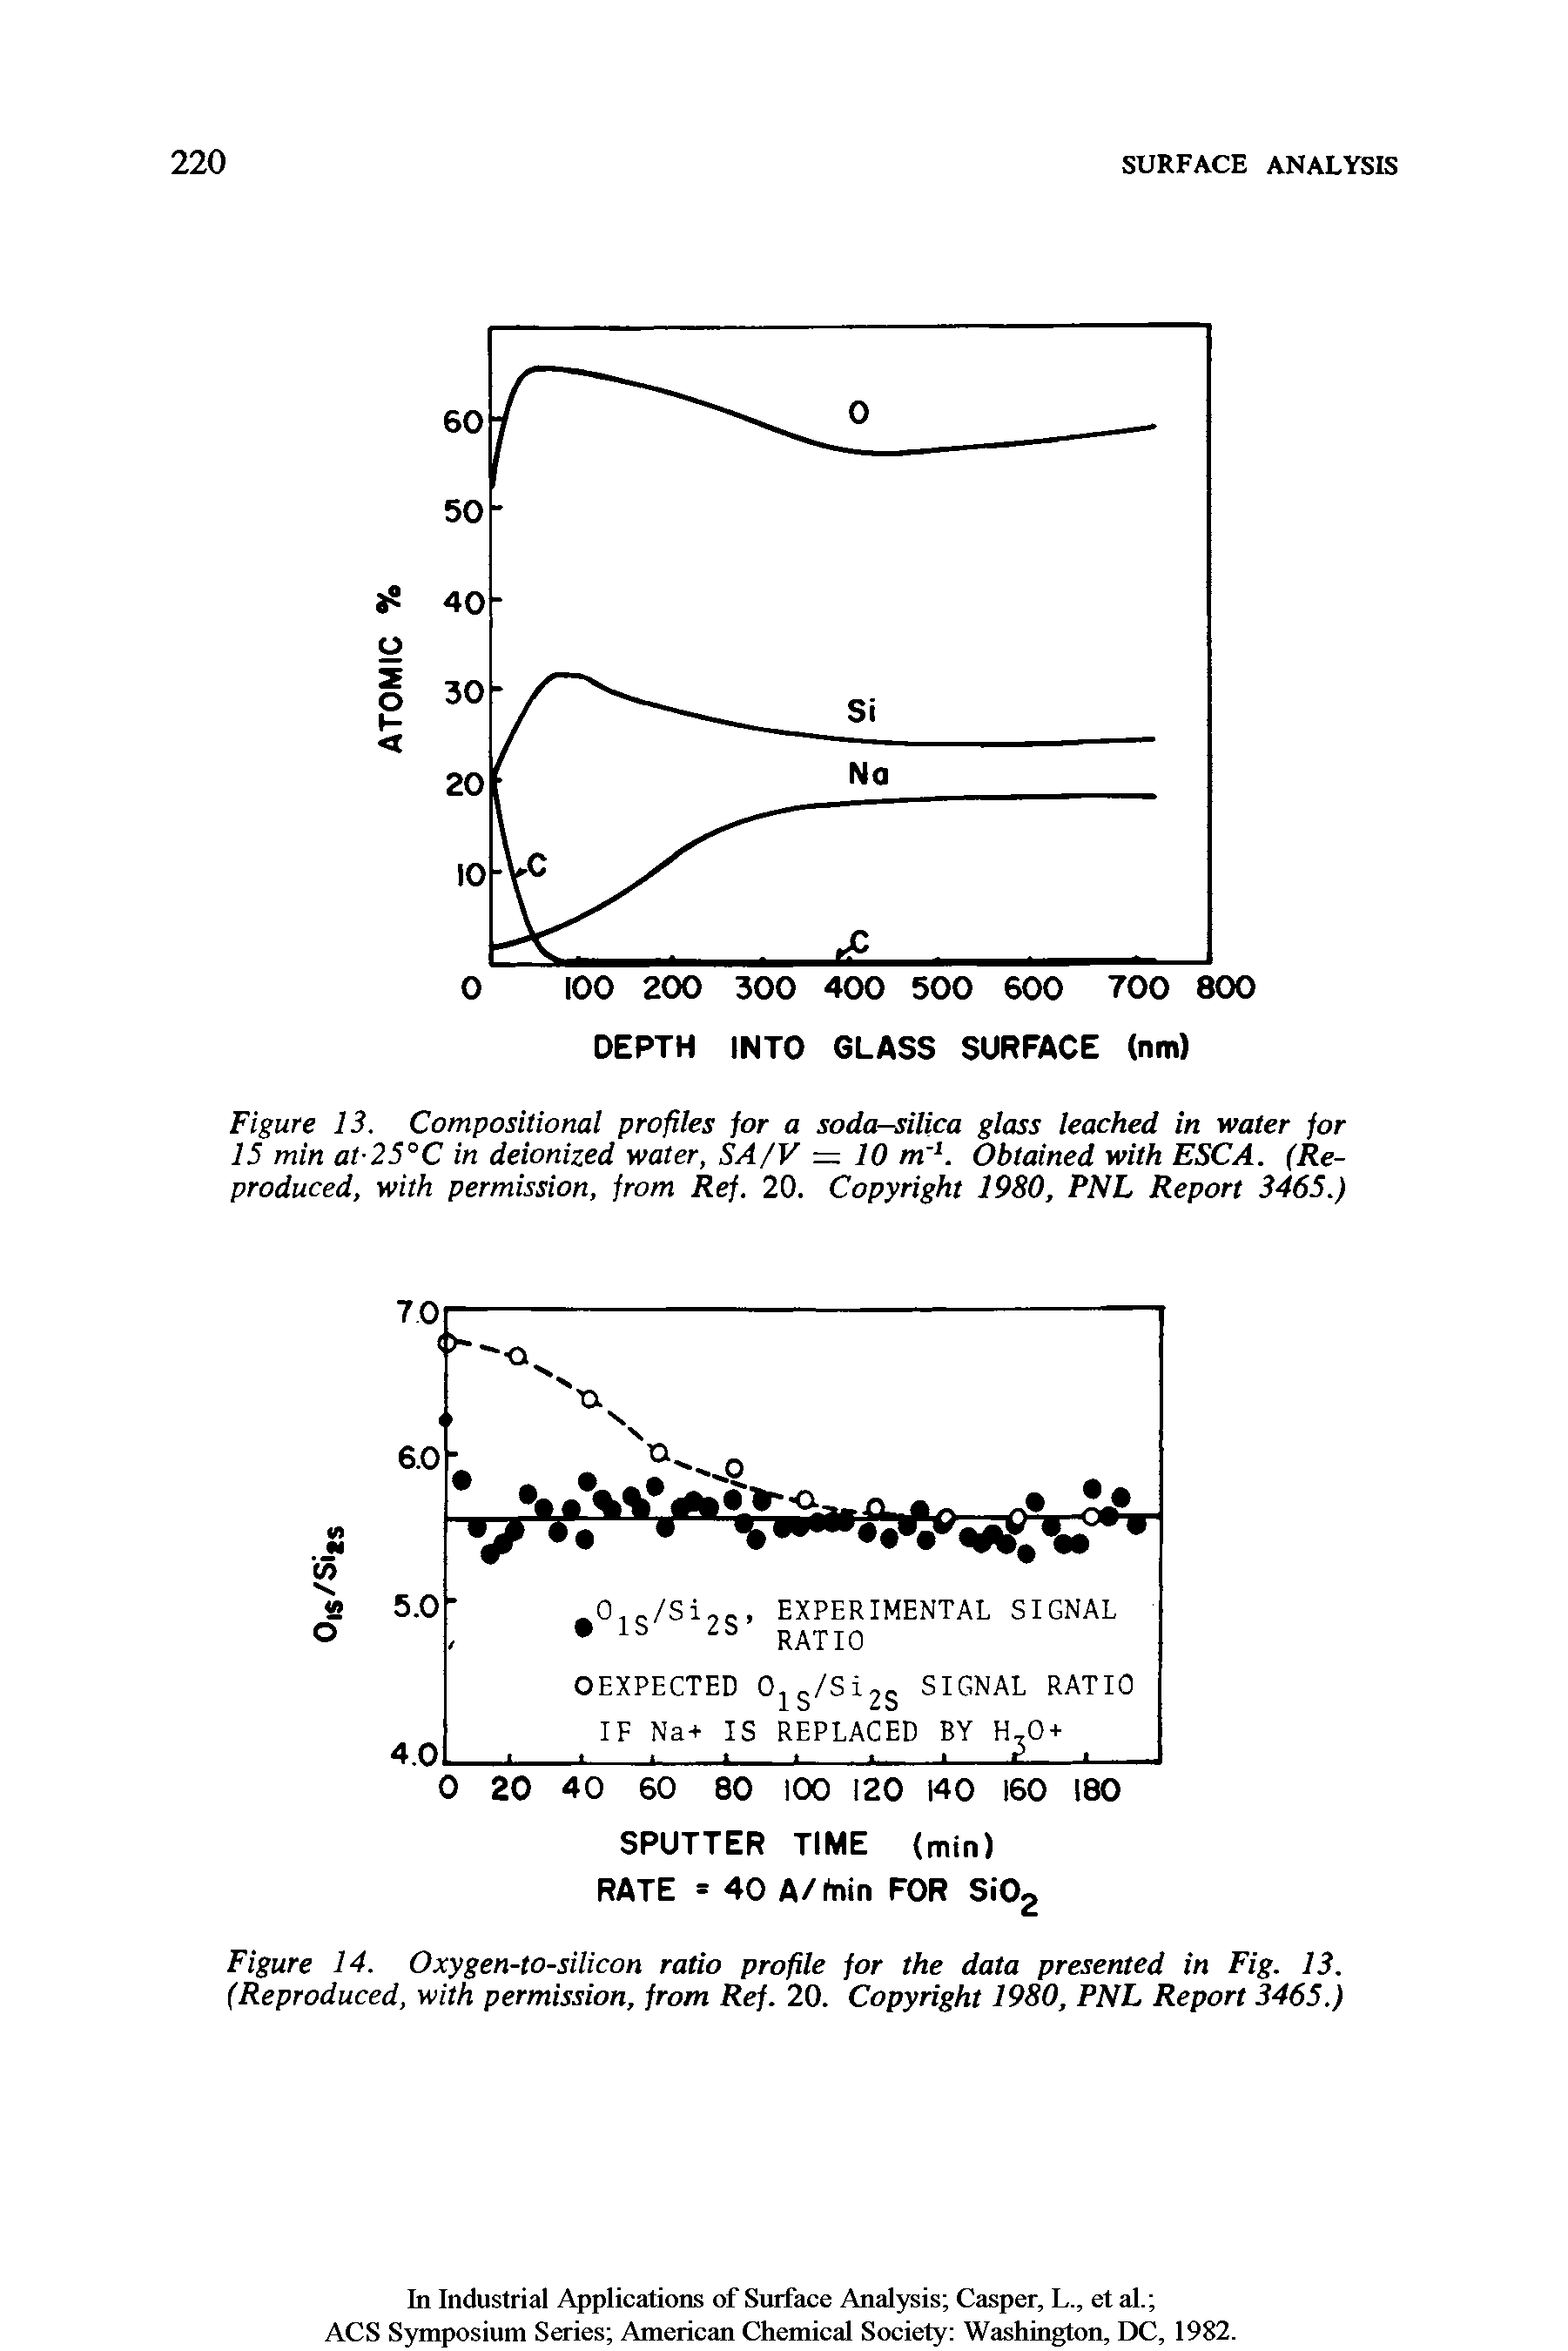 Figure 14. Oxygen-to-silicon ratio profile for the data presented in Fig. 13. (Reproduced, with permission, from Ref. 20. Copyright 1980, PNL Report 3465.)...